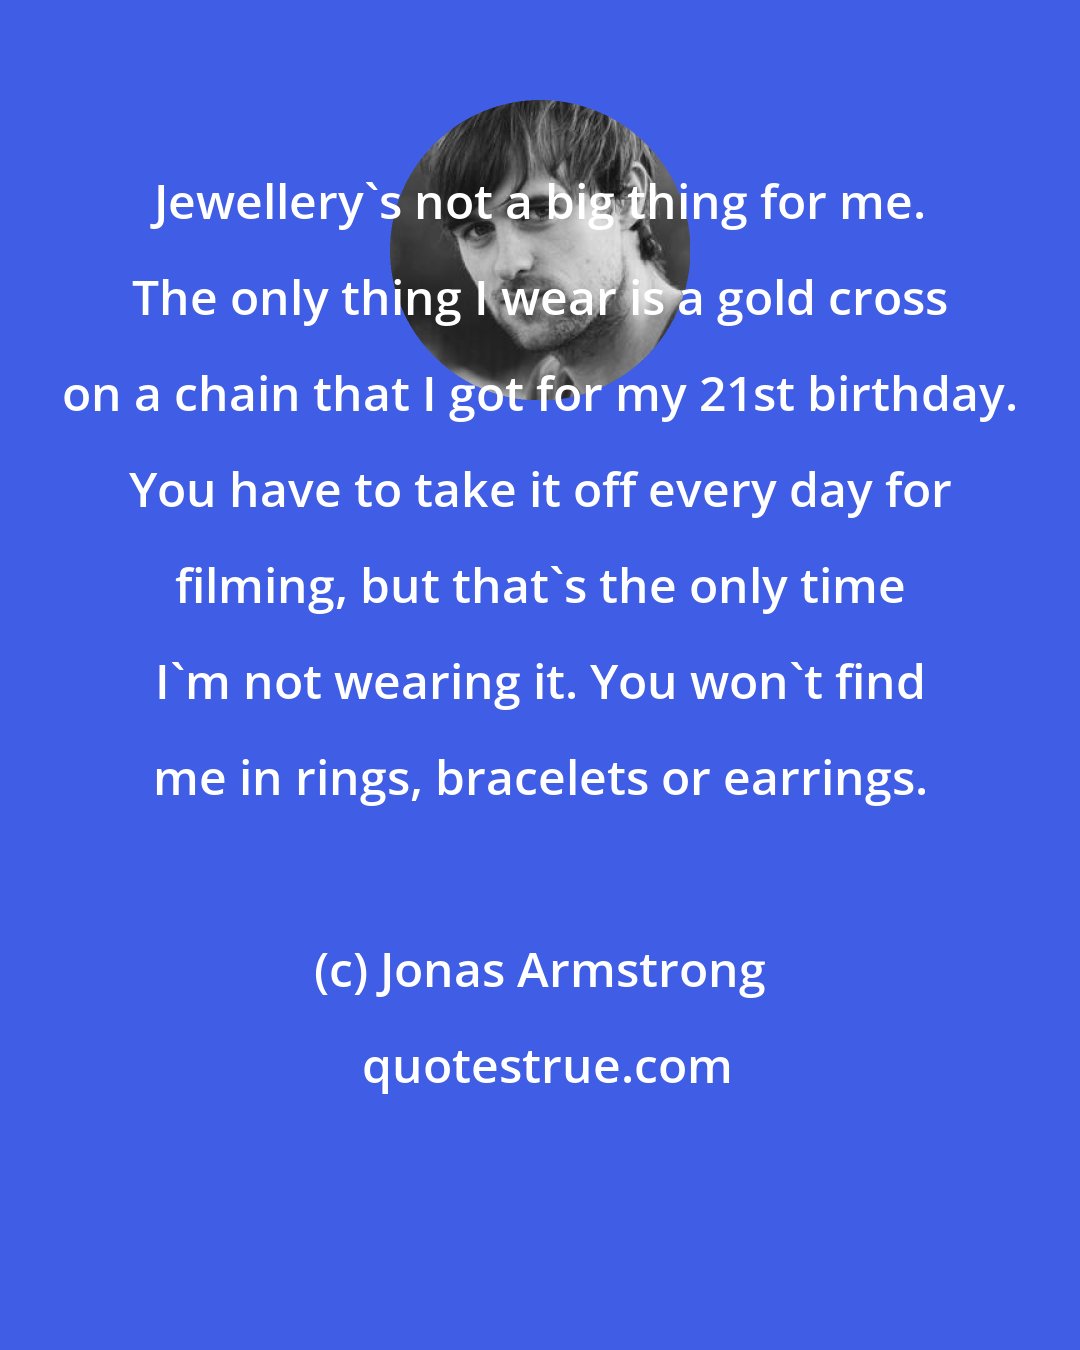 Jonas Armstrong: Jewellery's not a big thing for me. The only thing I wear is a gold cross on a chain that I got for my 21st birthday. You have to take it off every day for filming, but that's the only time I'm not wearing it. You won't find me in rings, bracelets or earrings.